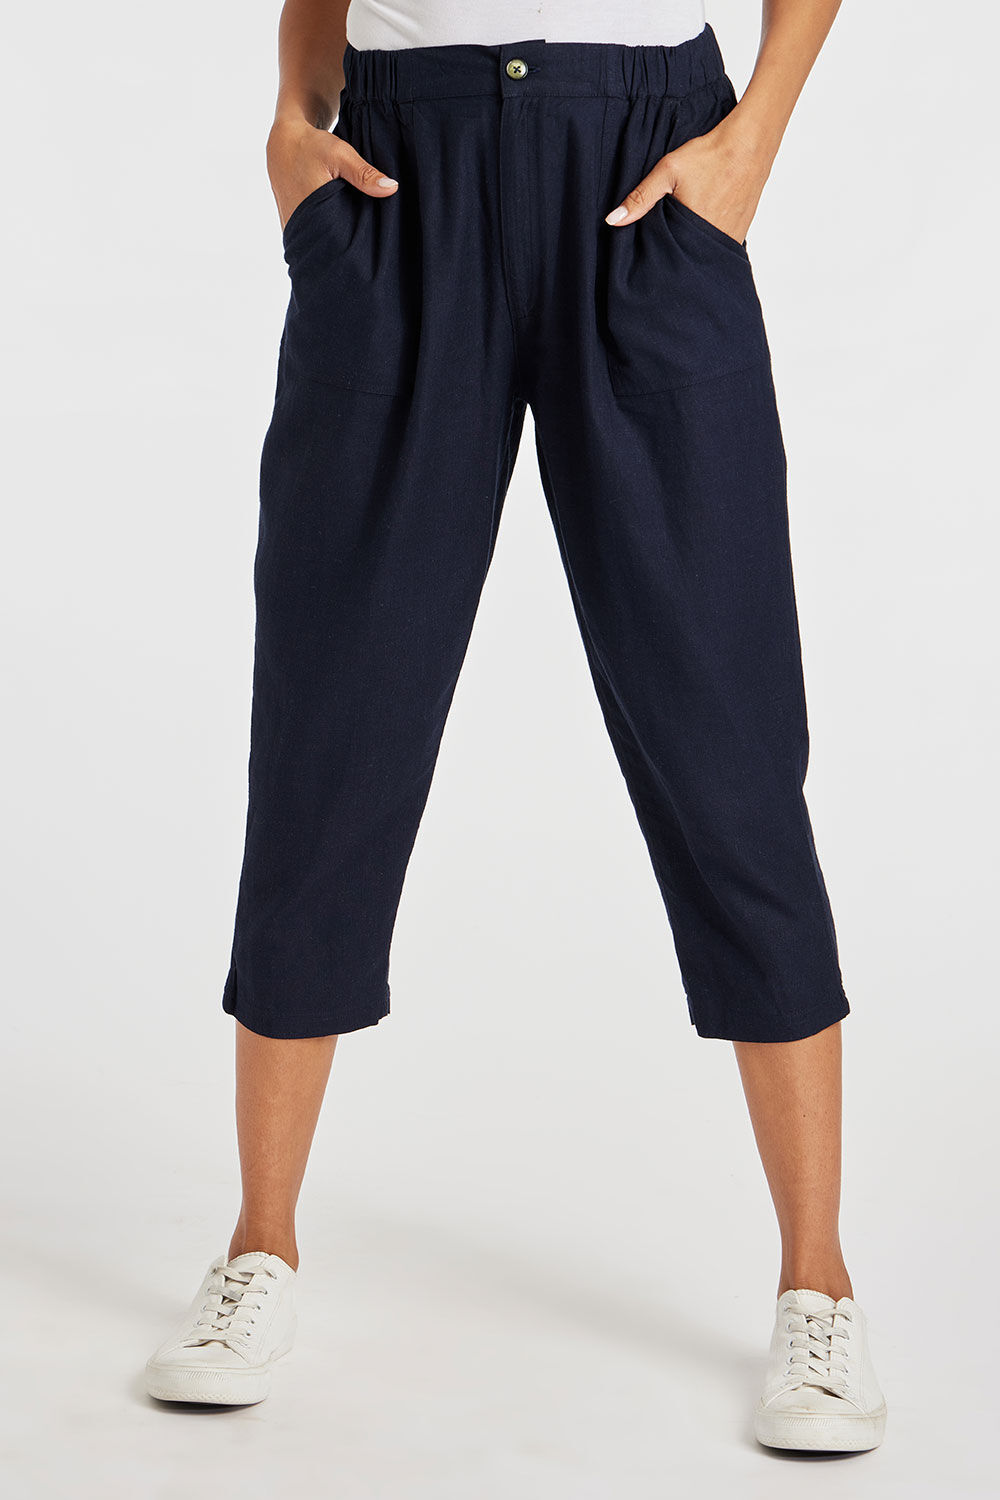 Bonmarche Navy Tapered Cropped Linen Trousers With Button Detail, Size: 12